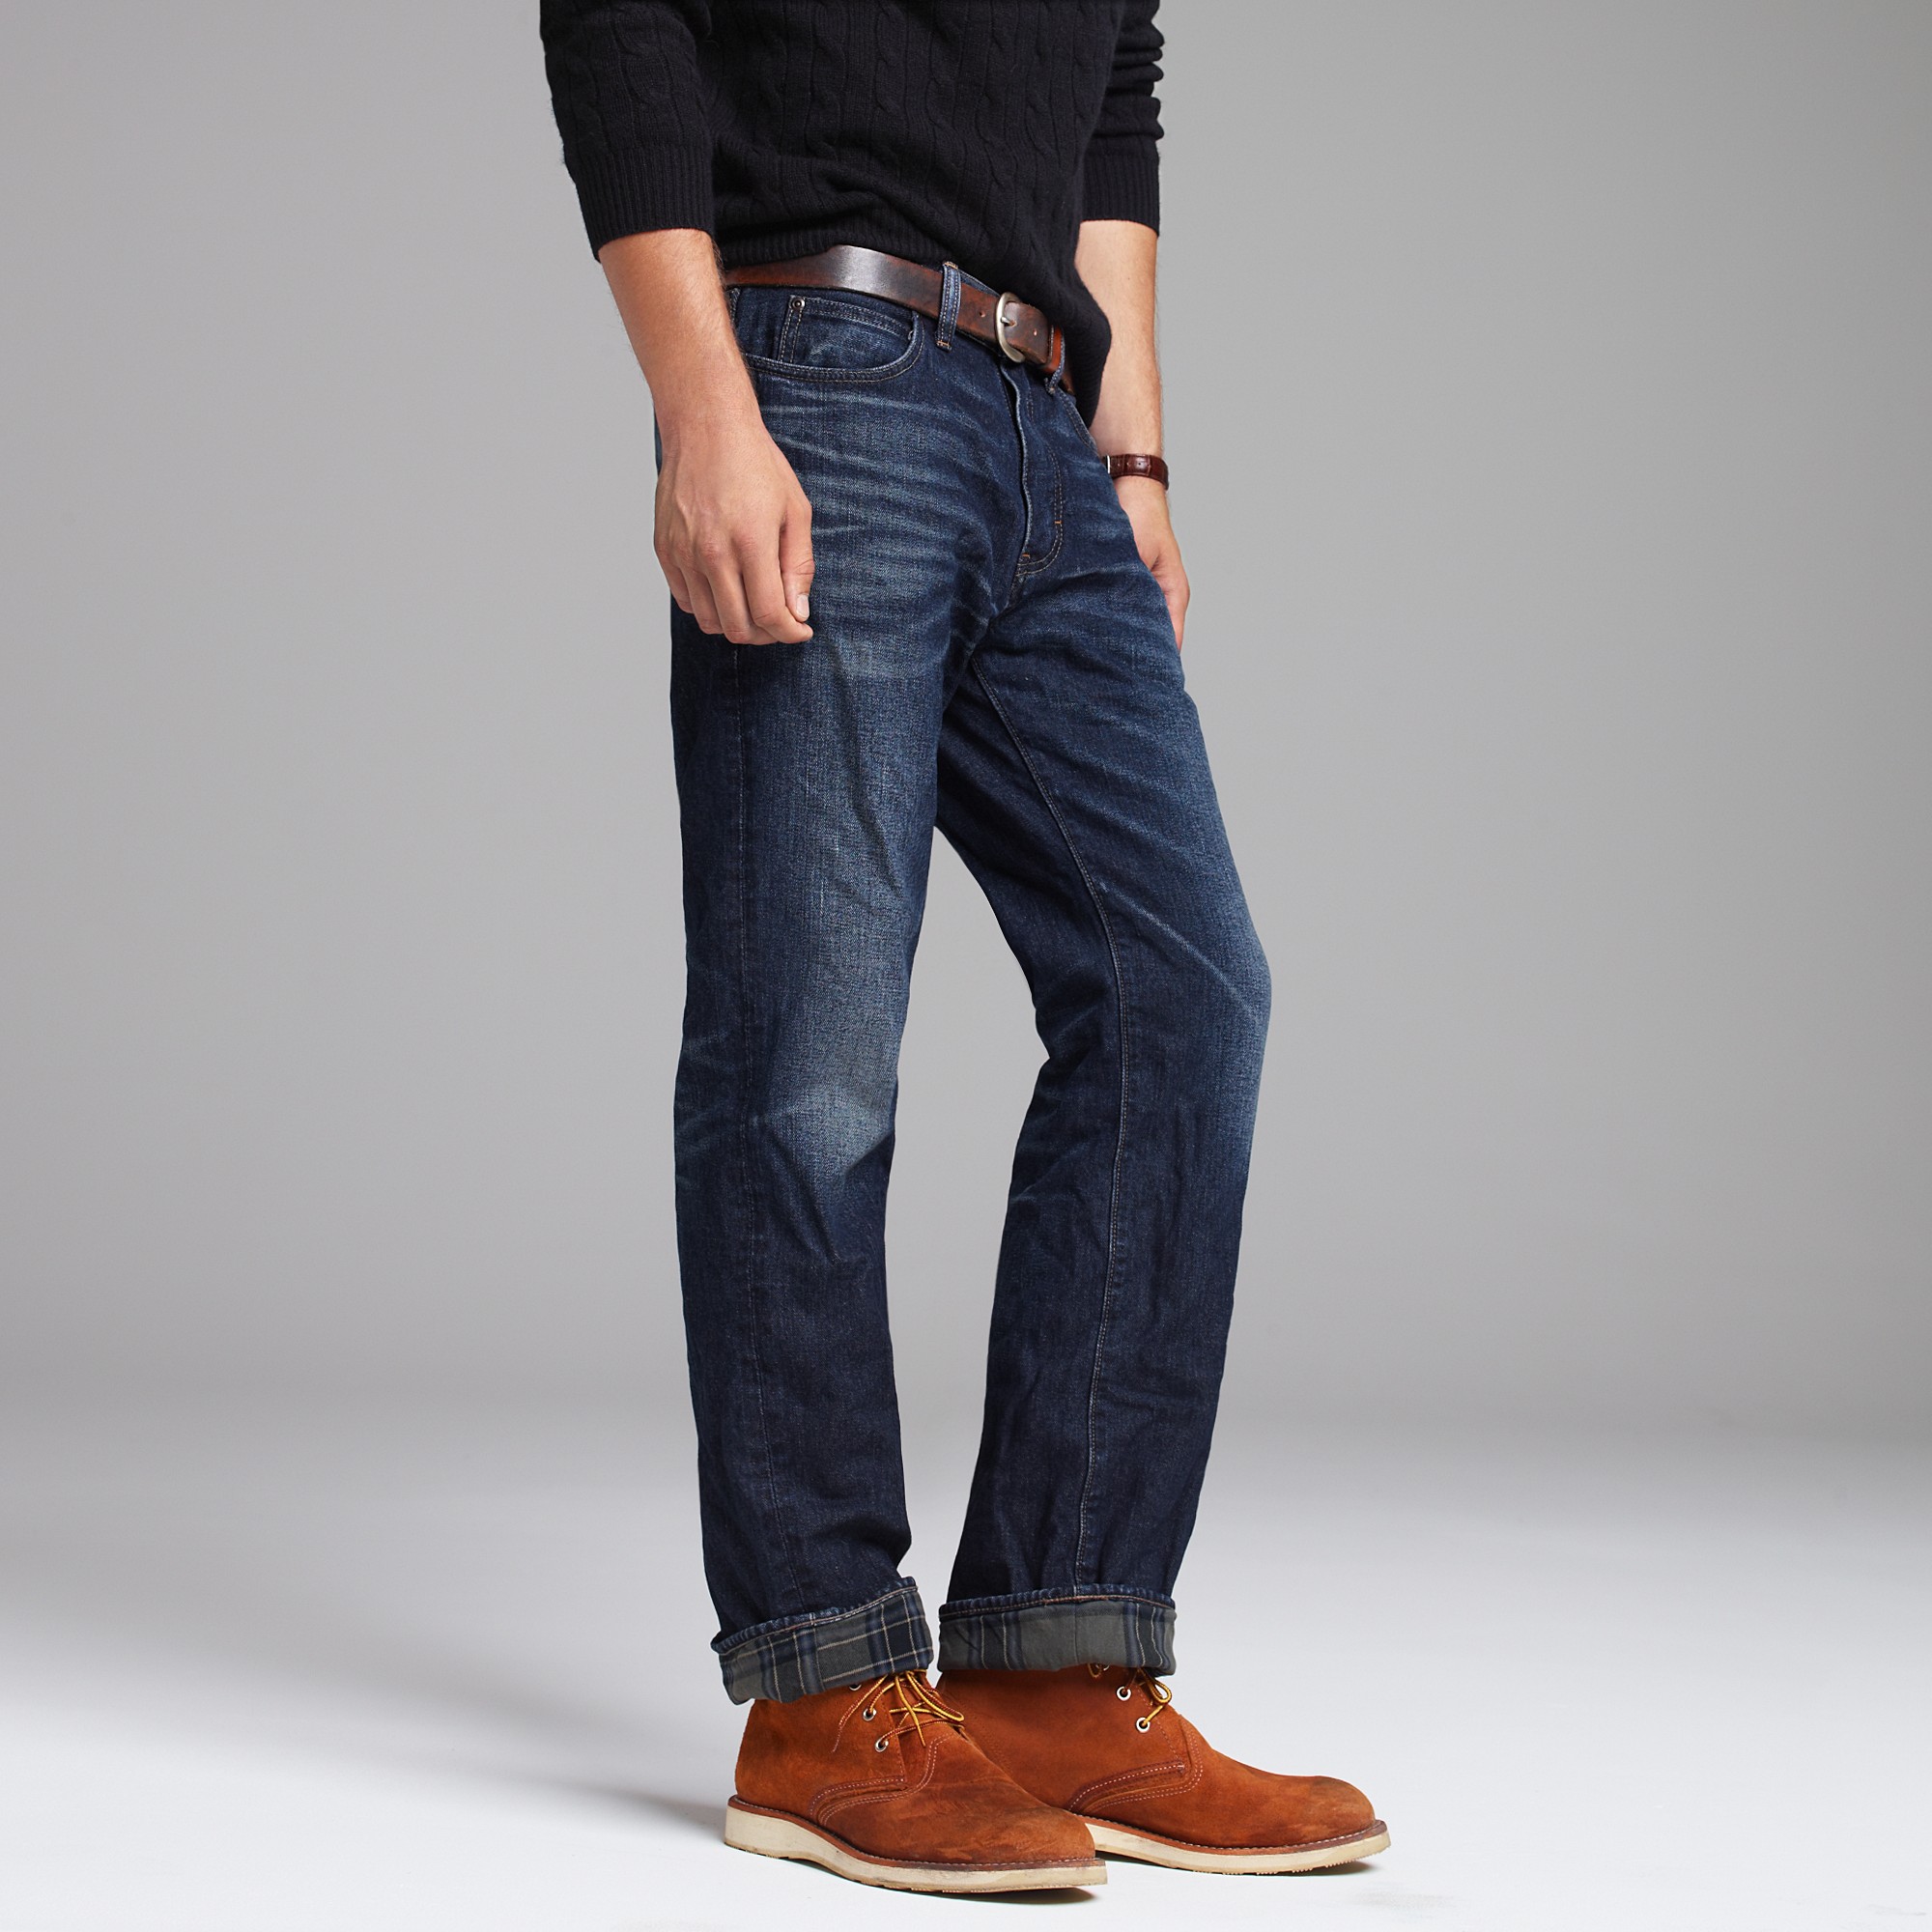 Lyst - J.Crew Straight-fit Flannel-lined Jean in Carbon Worn Wash in ...